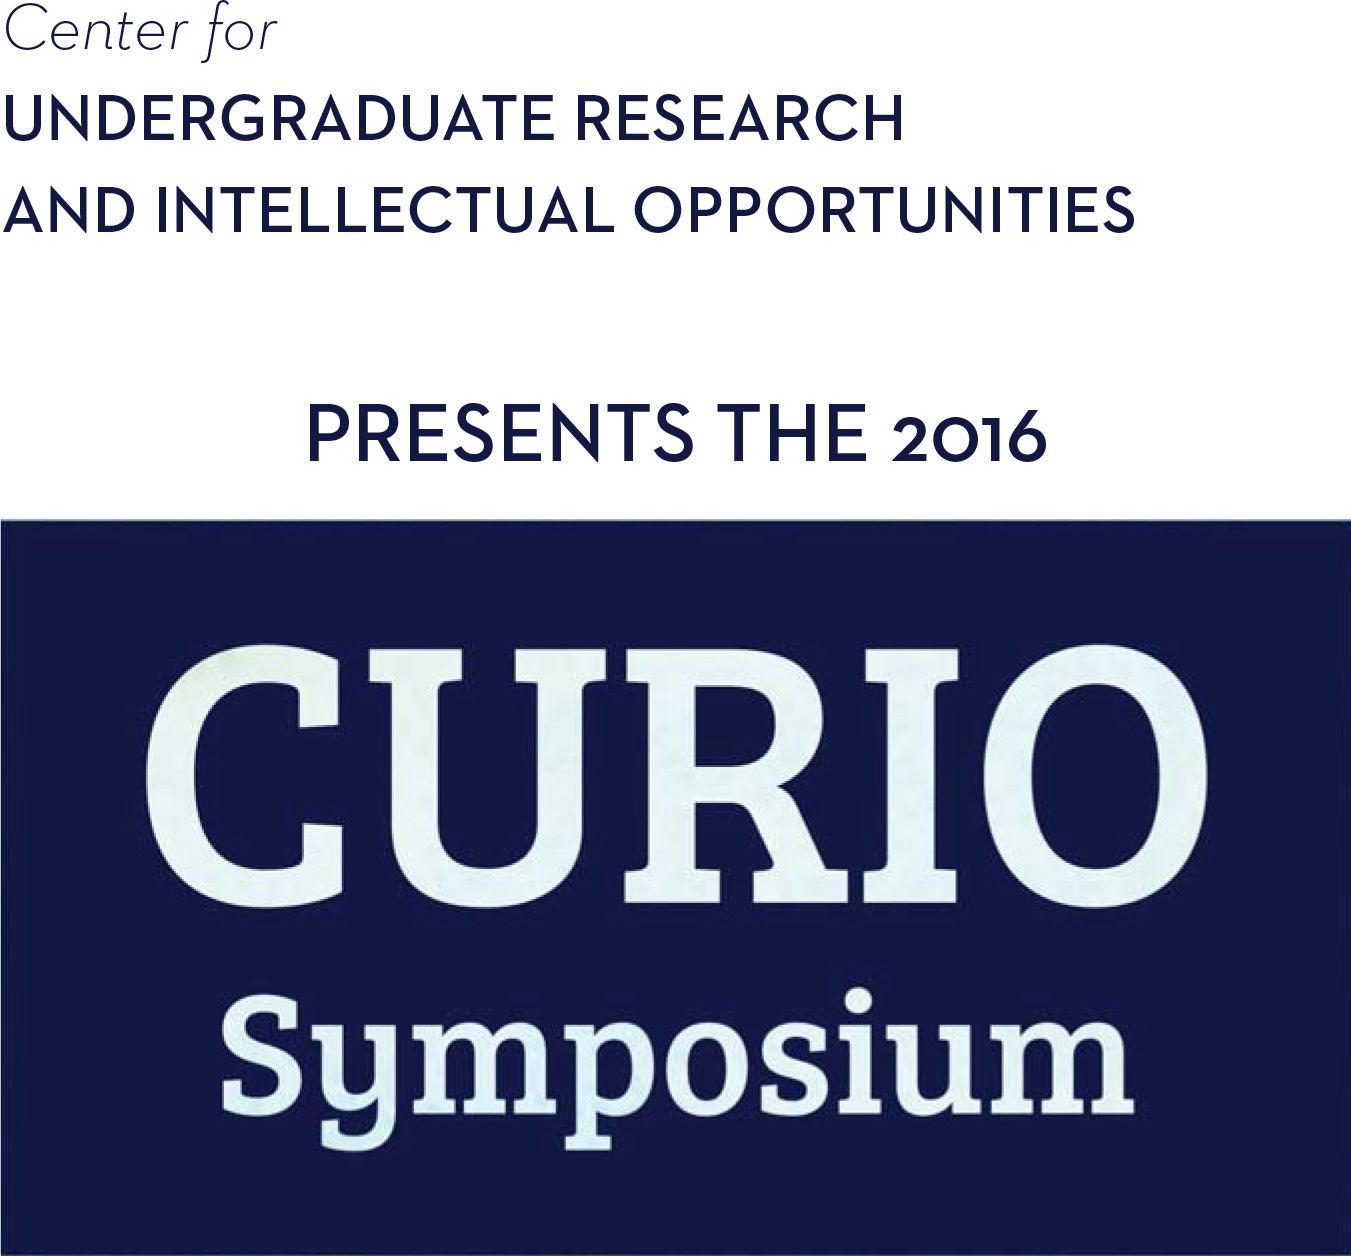 Get+Curious+about+CURIO%2C+Conference+highlights+student+research